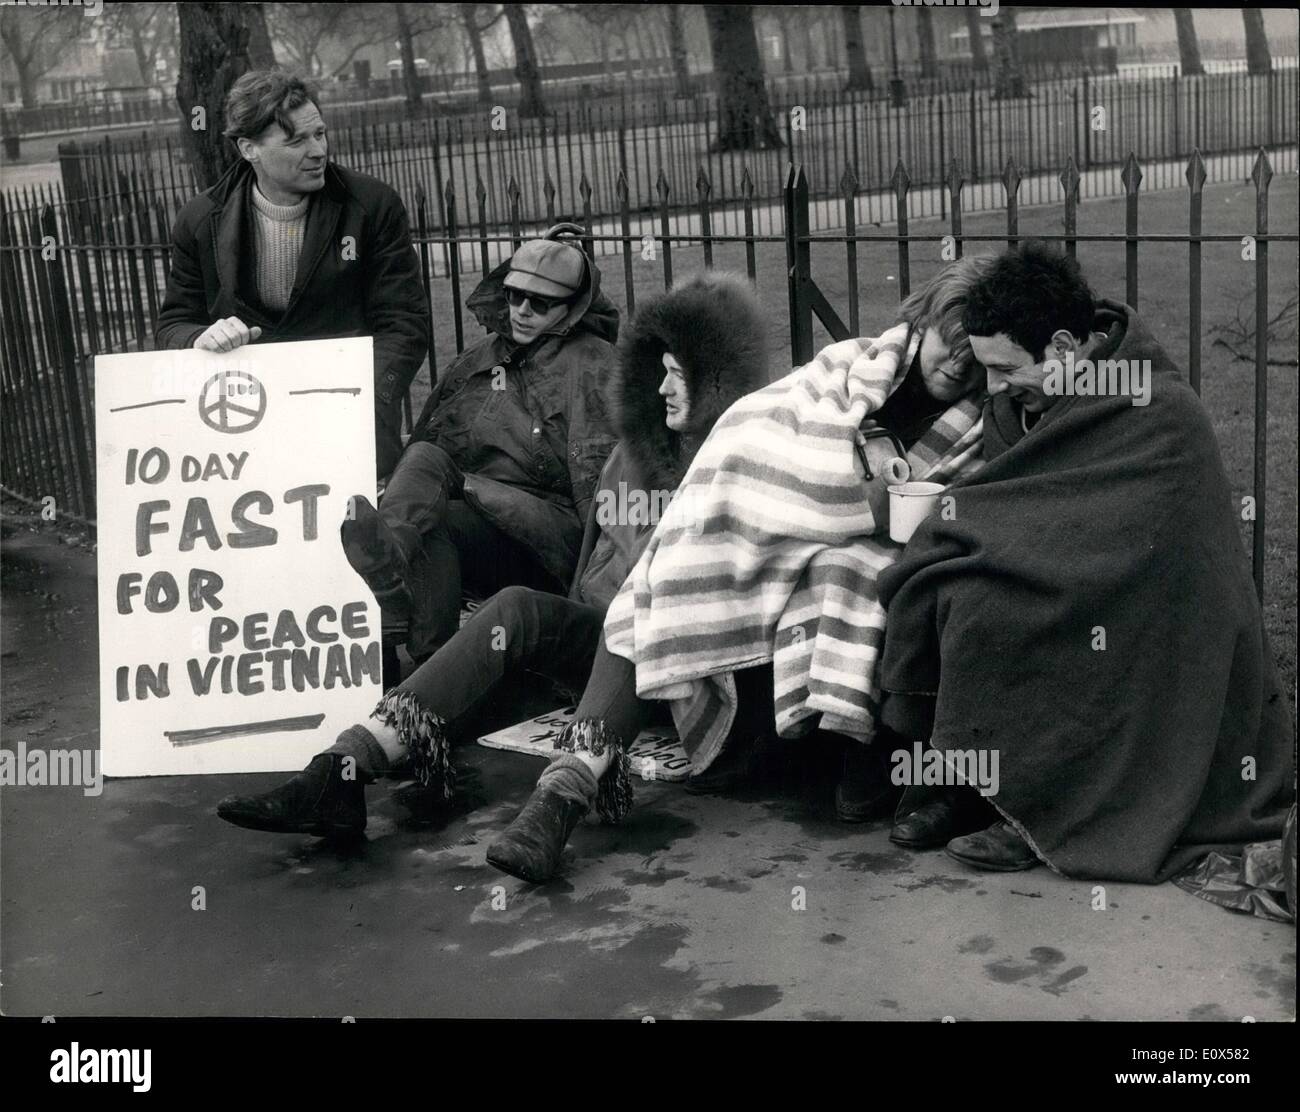 Apr. 04, 1965 - Committee Of 100 Supporters ON East: A dozen supporters of the Committee of 100 last night at Speakers Corner, Hyde Park, began a 10-day fast in Protest against the war in Vietnam, they will spend the nights in Friends House, St. Martin's Lane. Five of the faster where at Speaker';s Corner this morning - the others were appearing in Court. They will allow themselves four pints of water a day.Photo Shows The five faster at Speakers Corner this morning - (L-R): Inge Oskarsson, of Sweden; Juliana Maurice Stock Photo